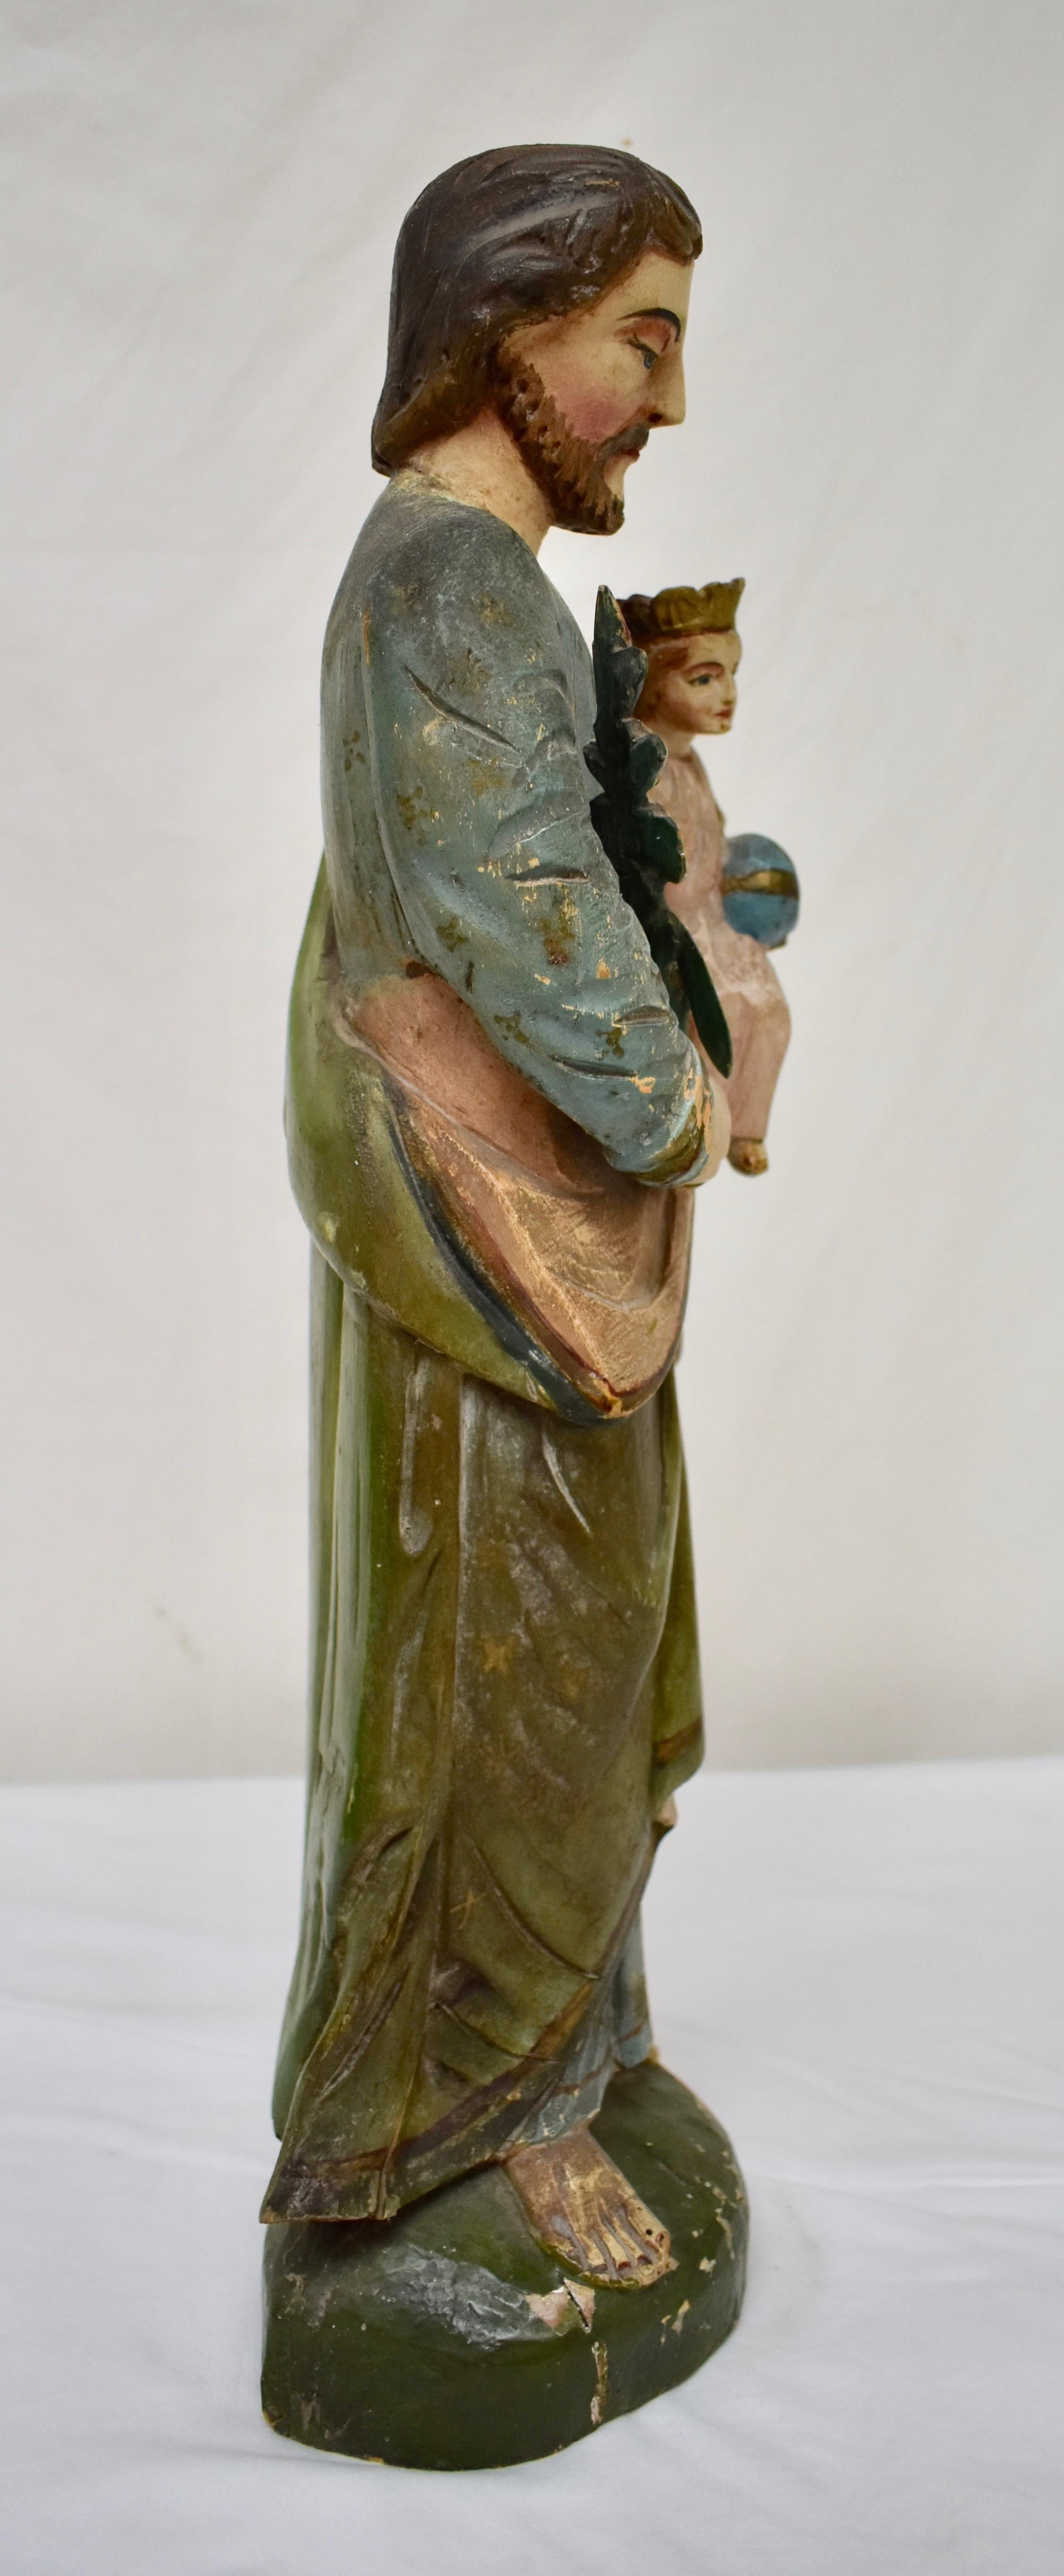 19th Century Hand Carved Wooden Sculpture of Saint Joseph with Baby Jesus